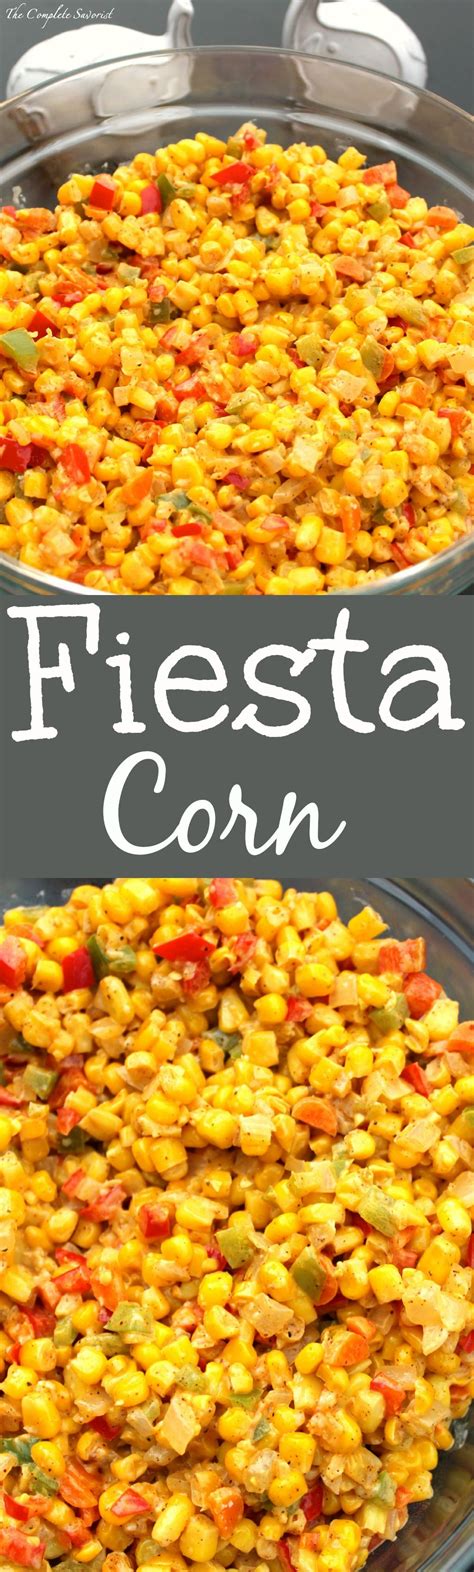 Fiesta Corn ~ Corn Bell Peppers Carrots And Onions